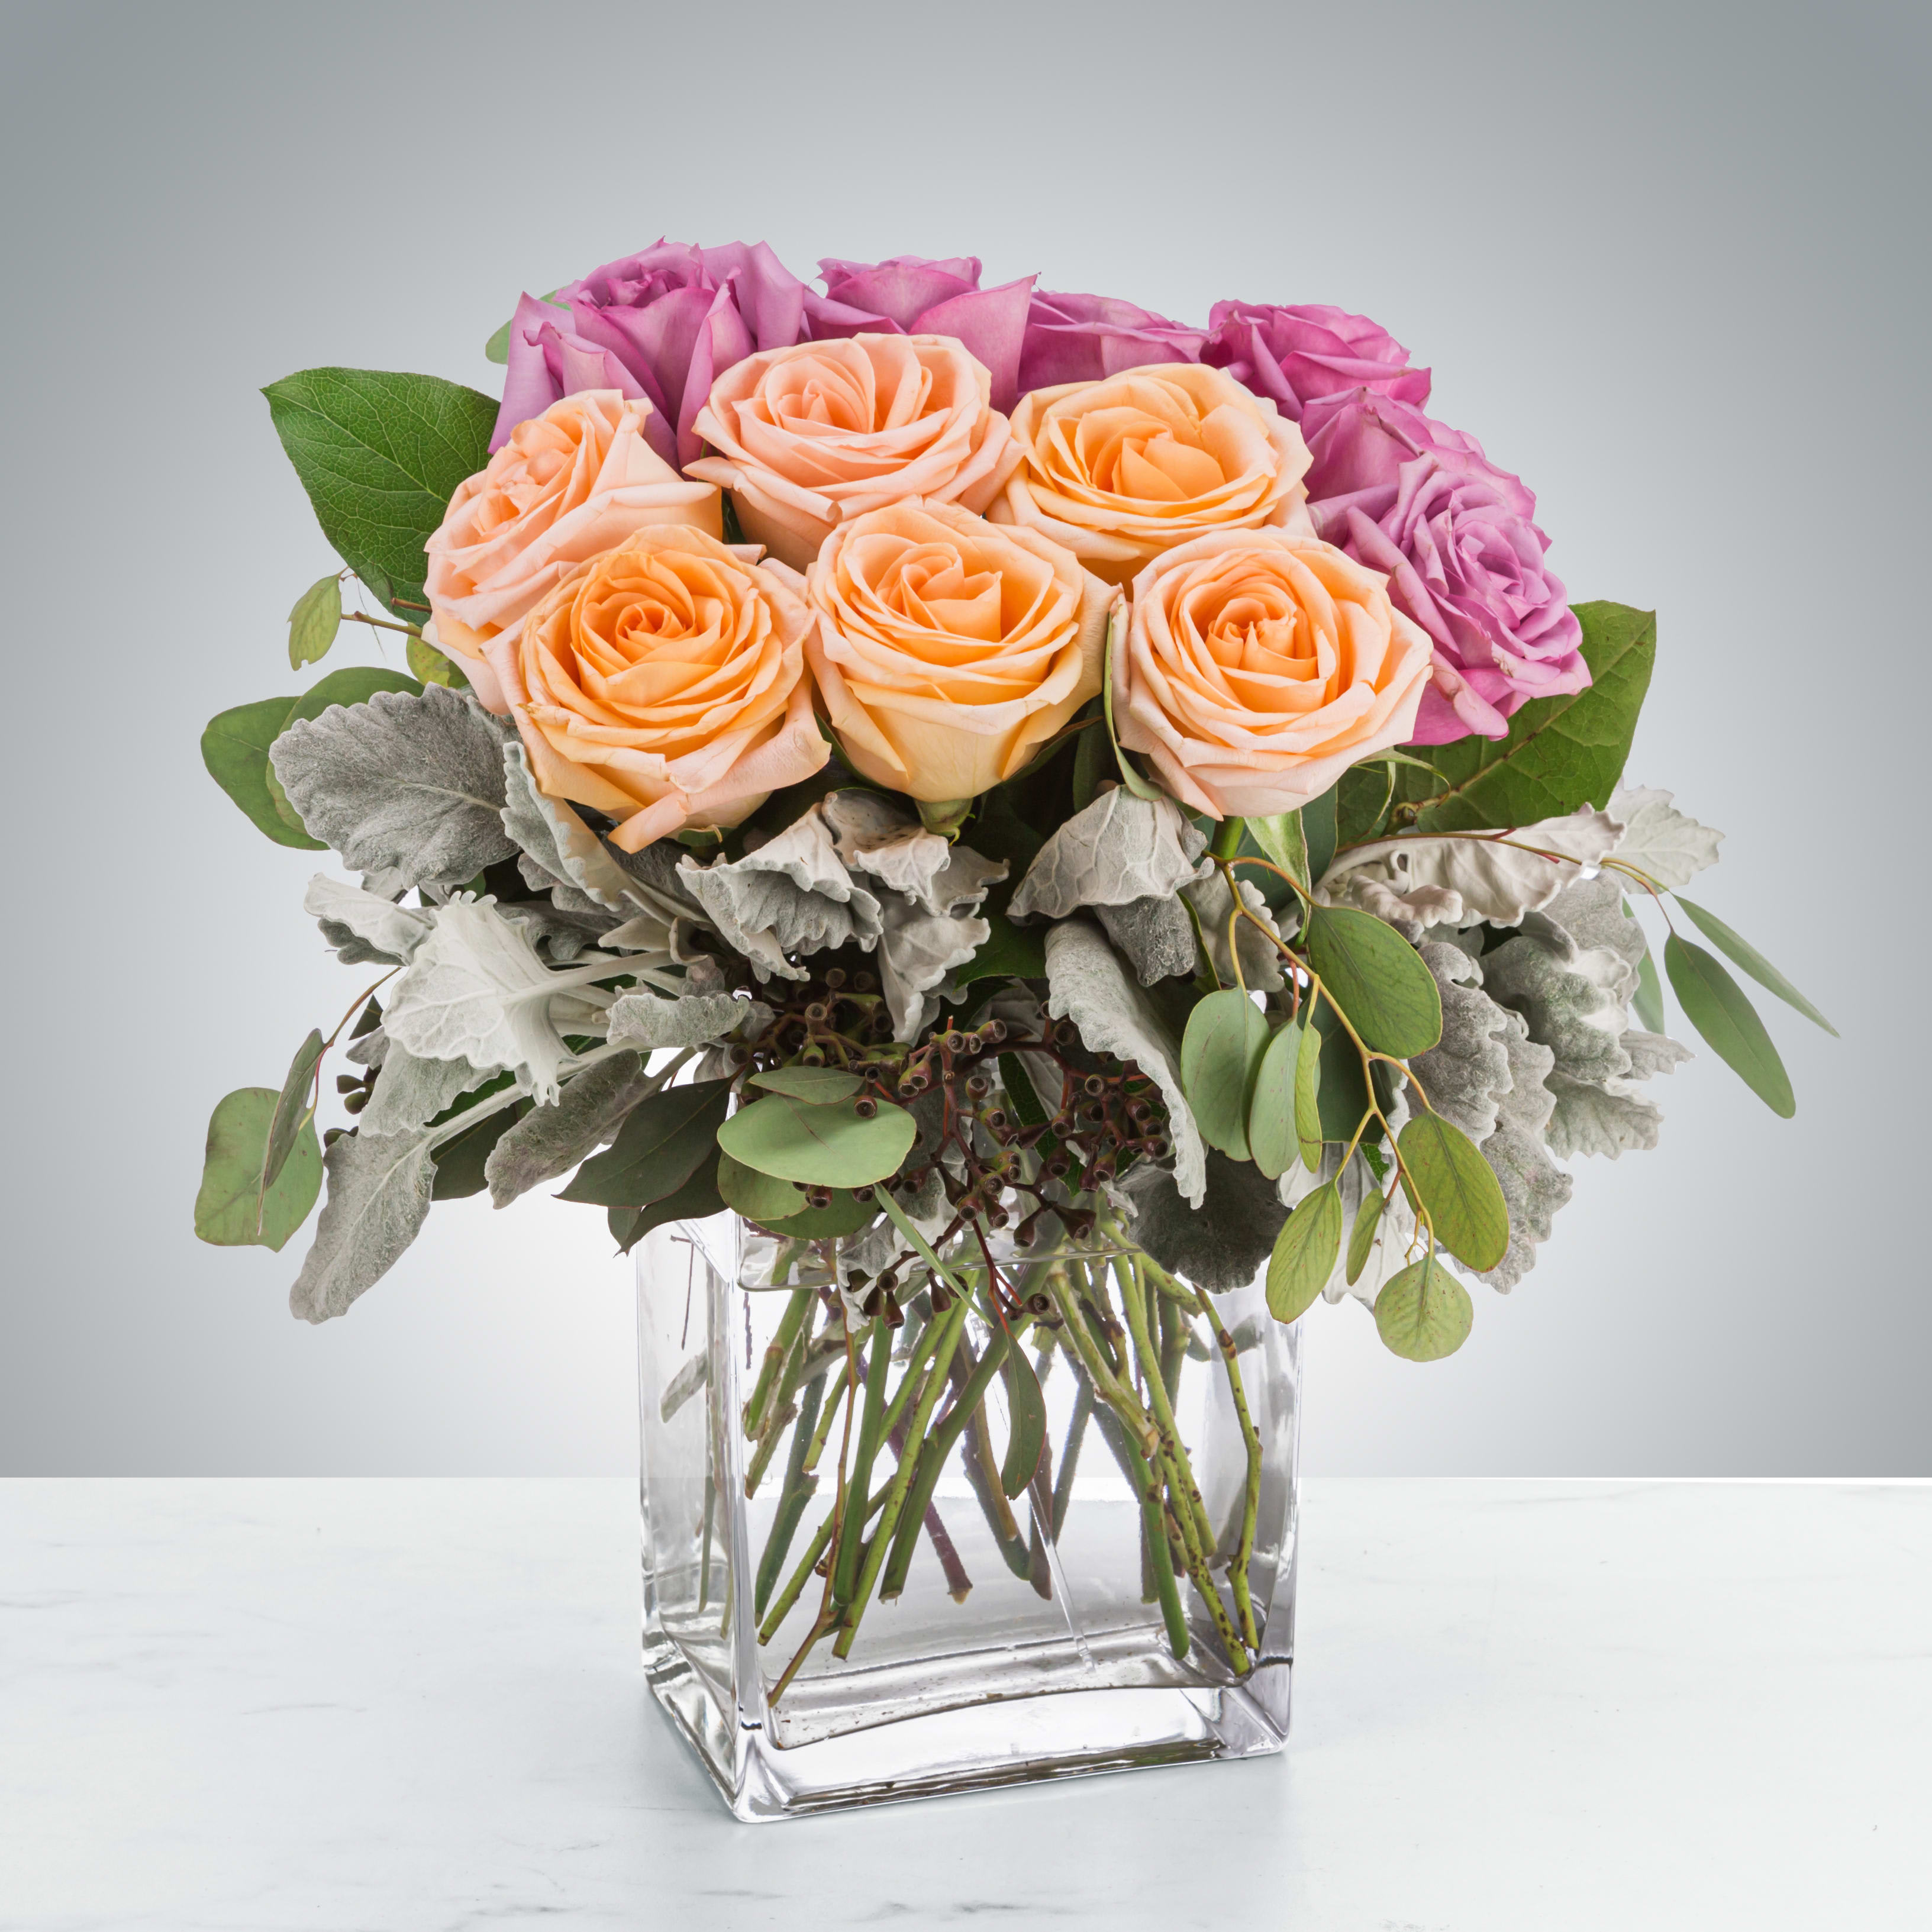 Gemini  - This luxury arrangement is a mix of peach and lavender roses direct from Ecuador, sure to please. The perfect way to show how much you care. Standard is 12 roses, deluxe 18, and premium 24 roses.  Approximate Dimensions: 15&quot;D x 18&quot;H